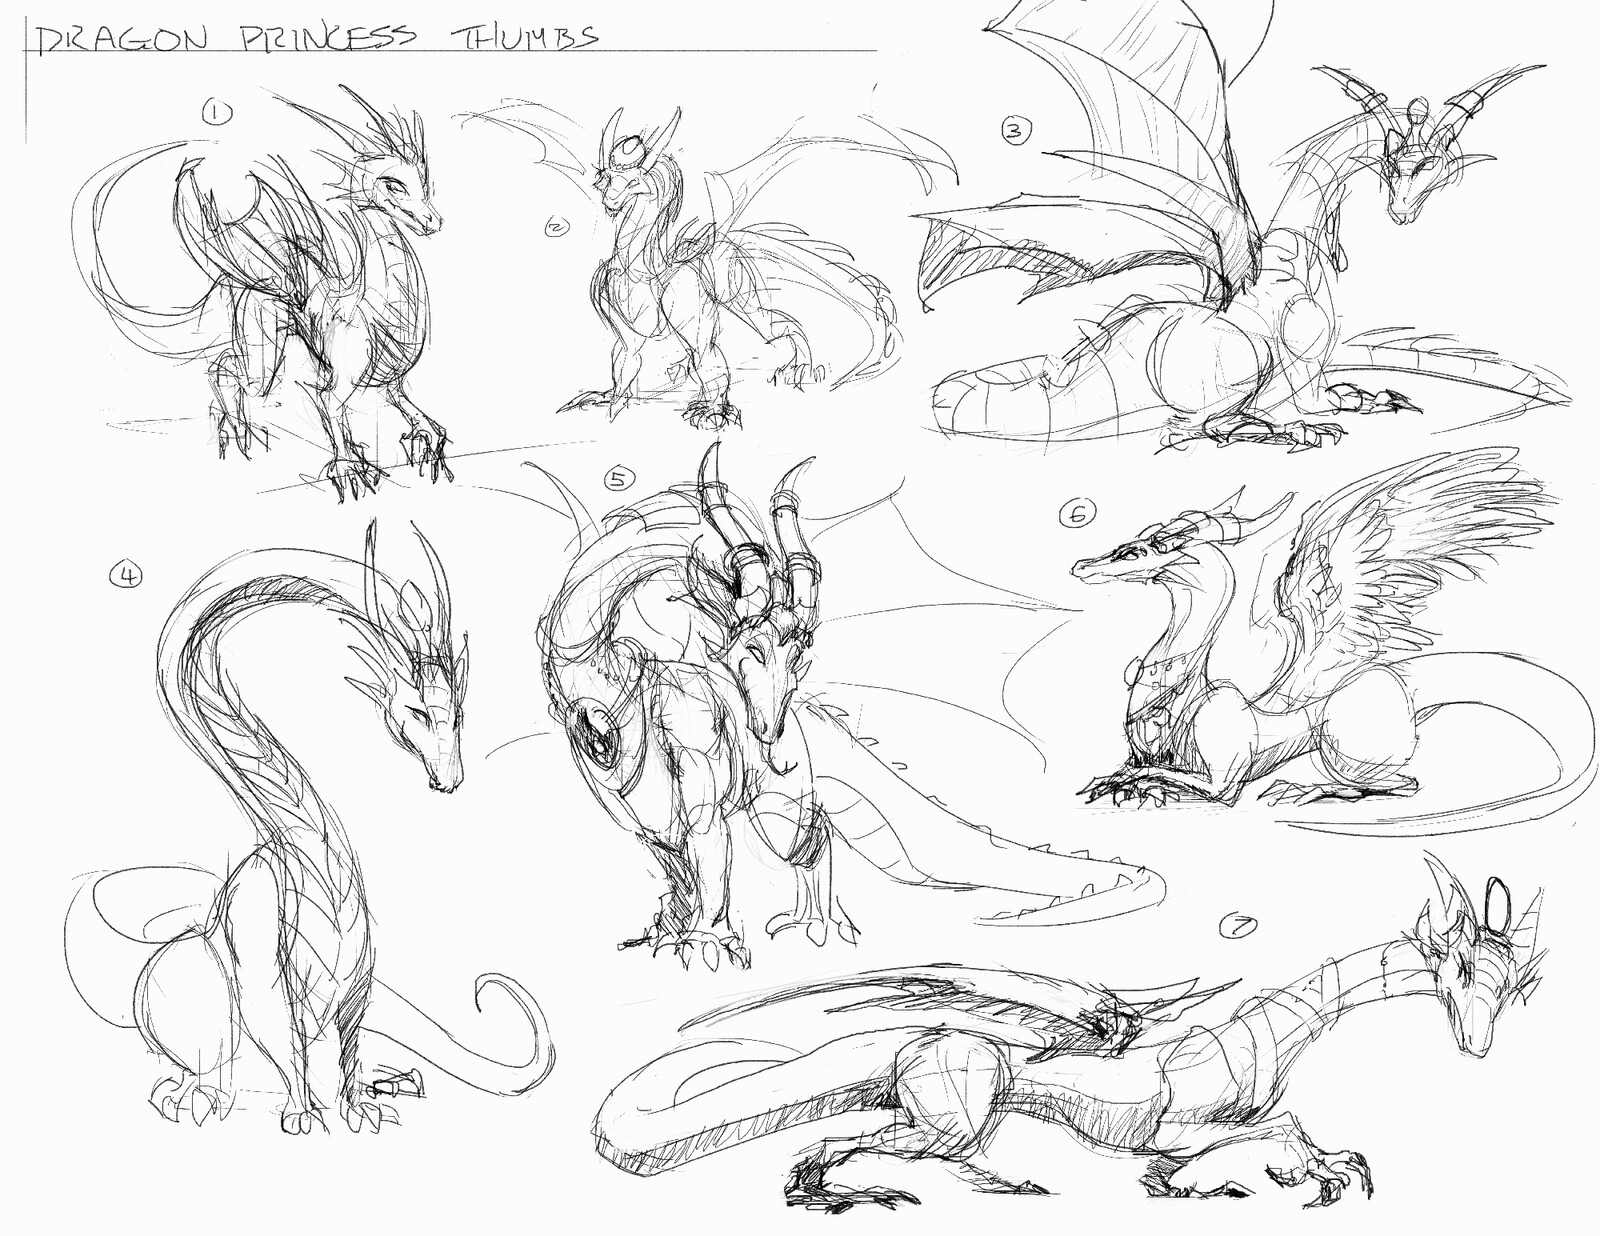 Exploration sketches of the dragon princess